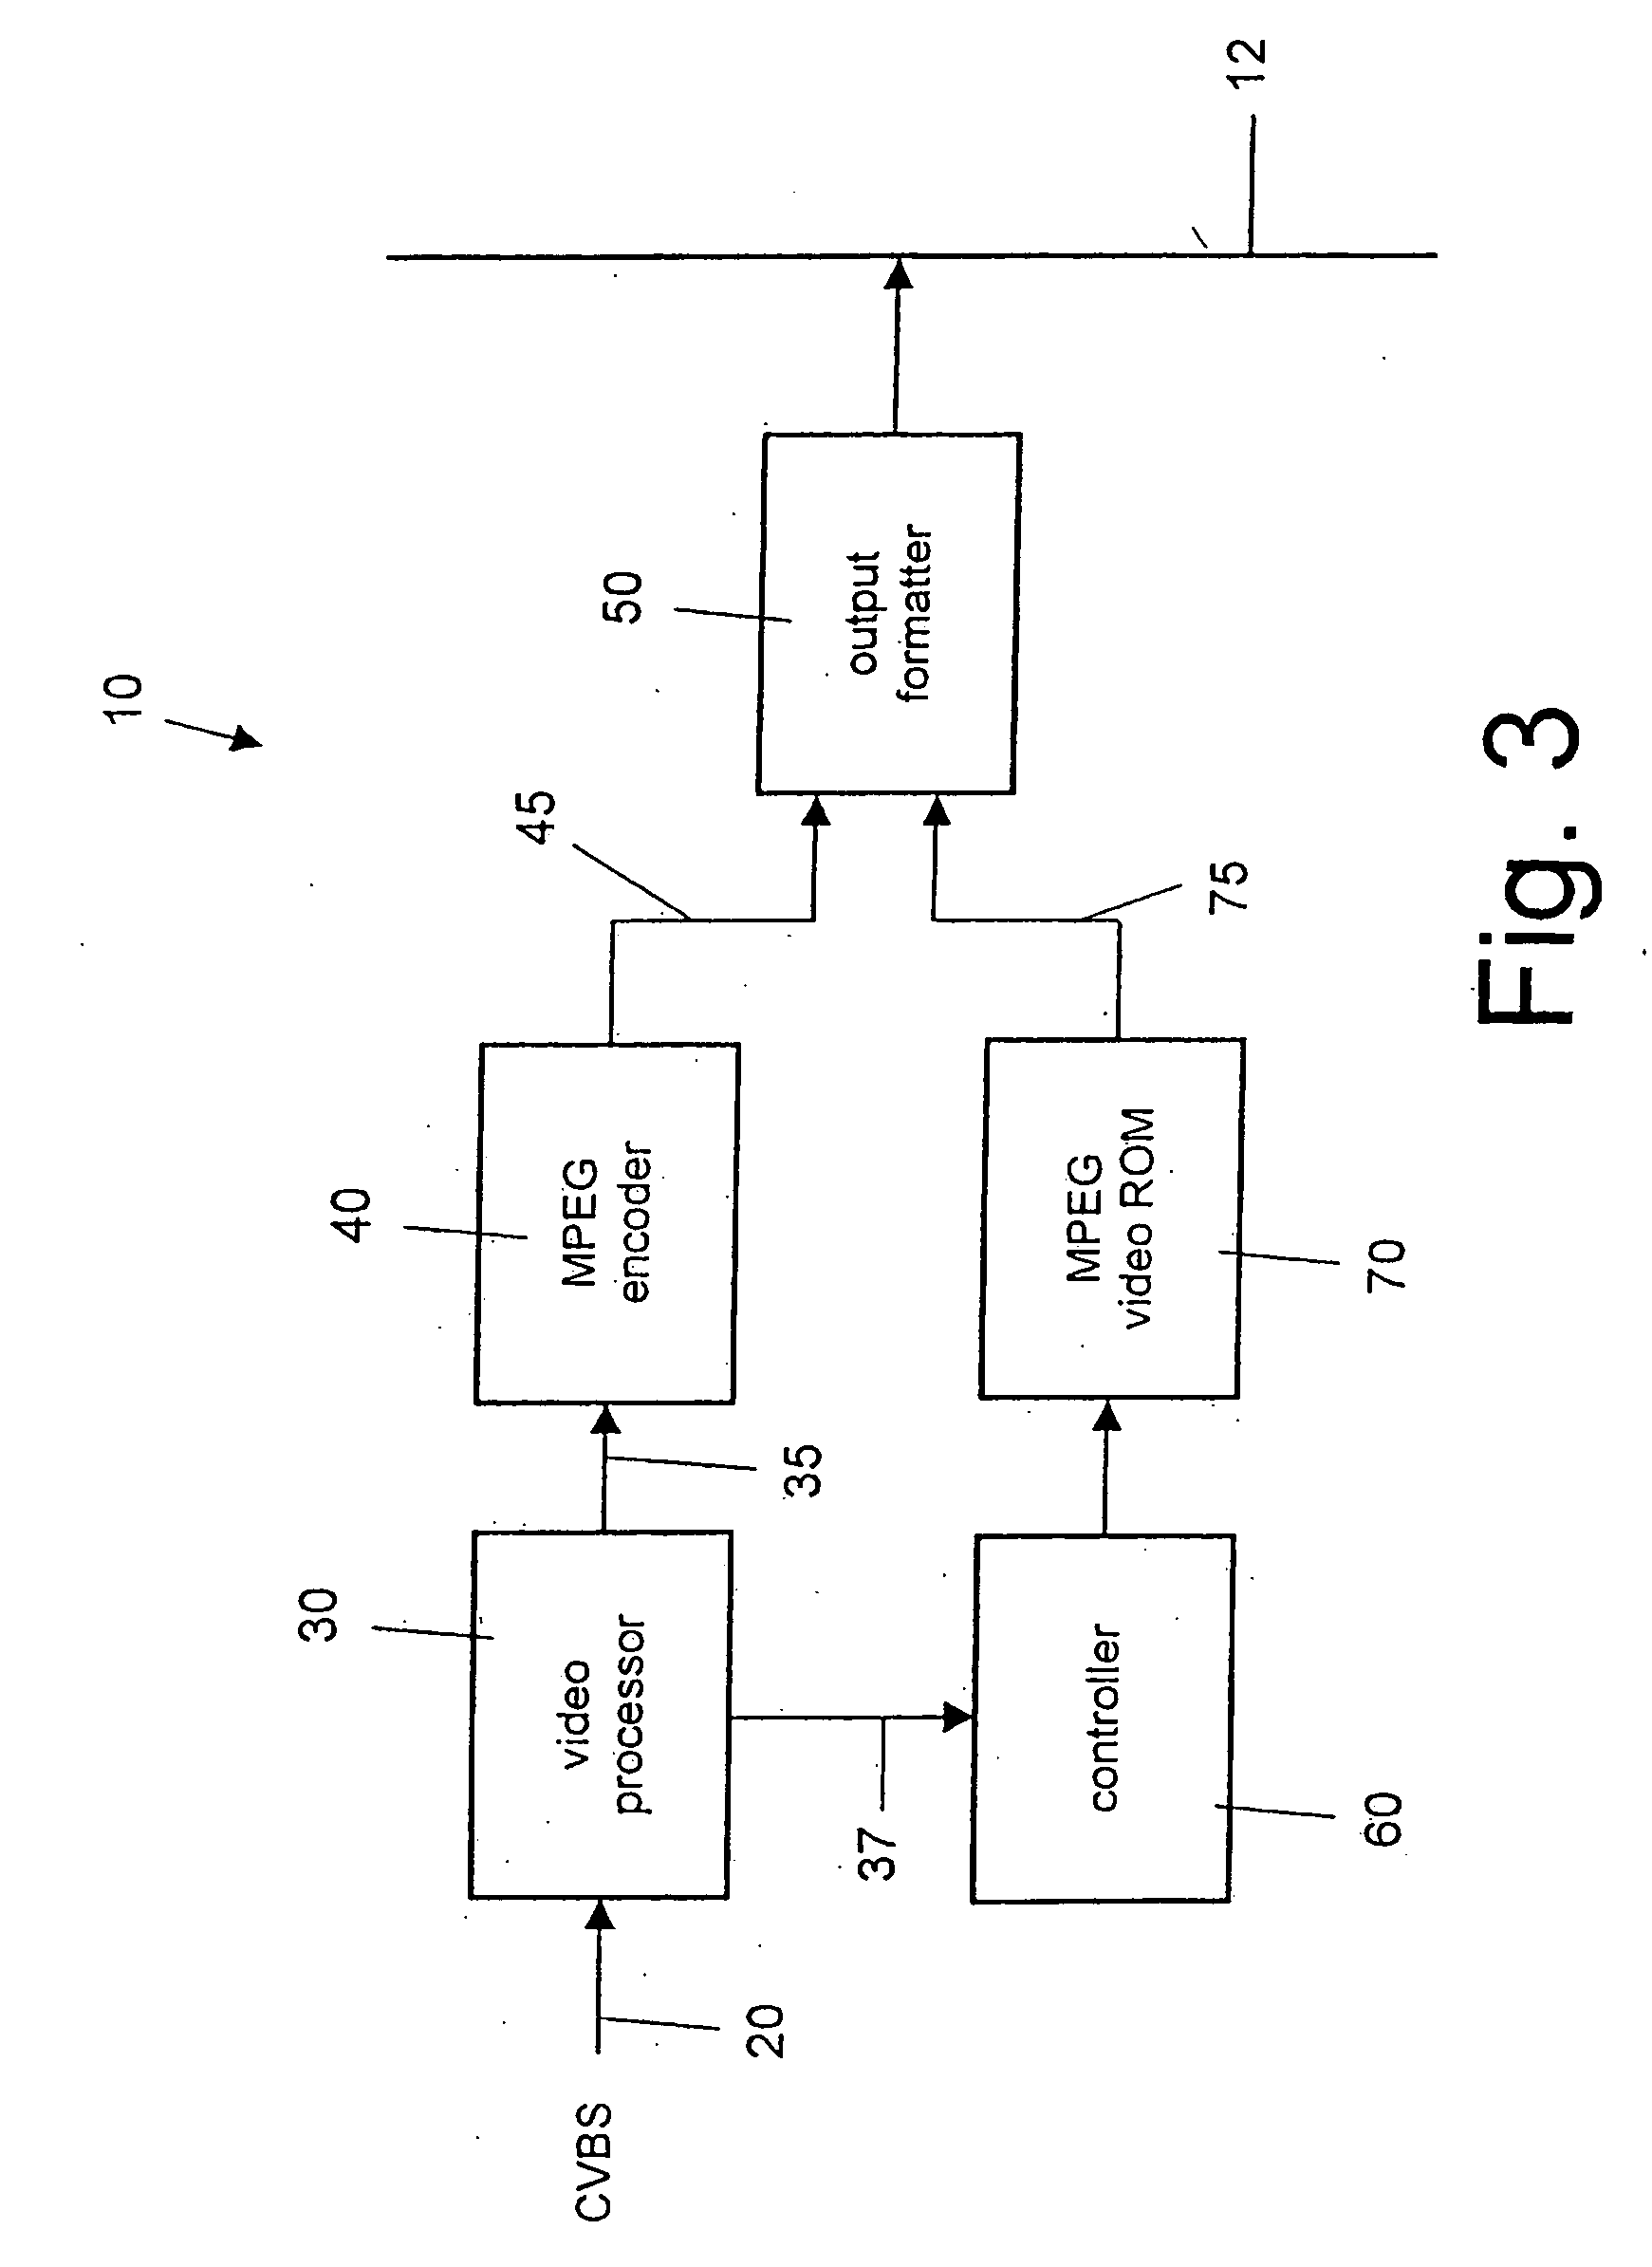 Mobile television receiver